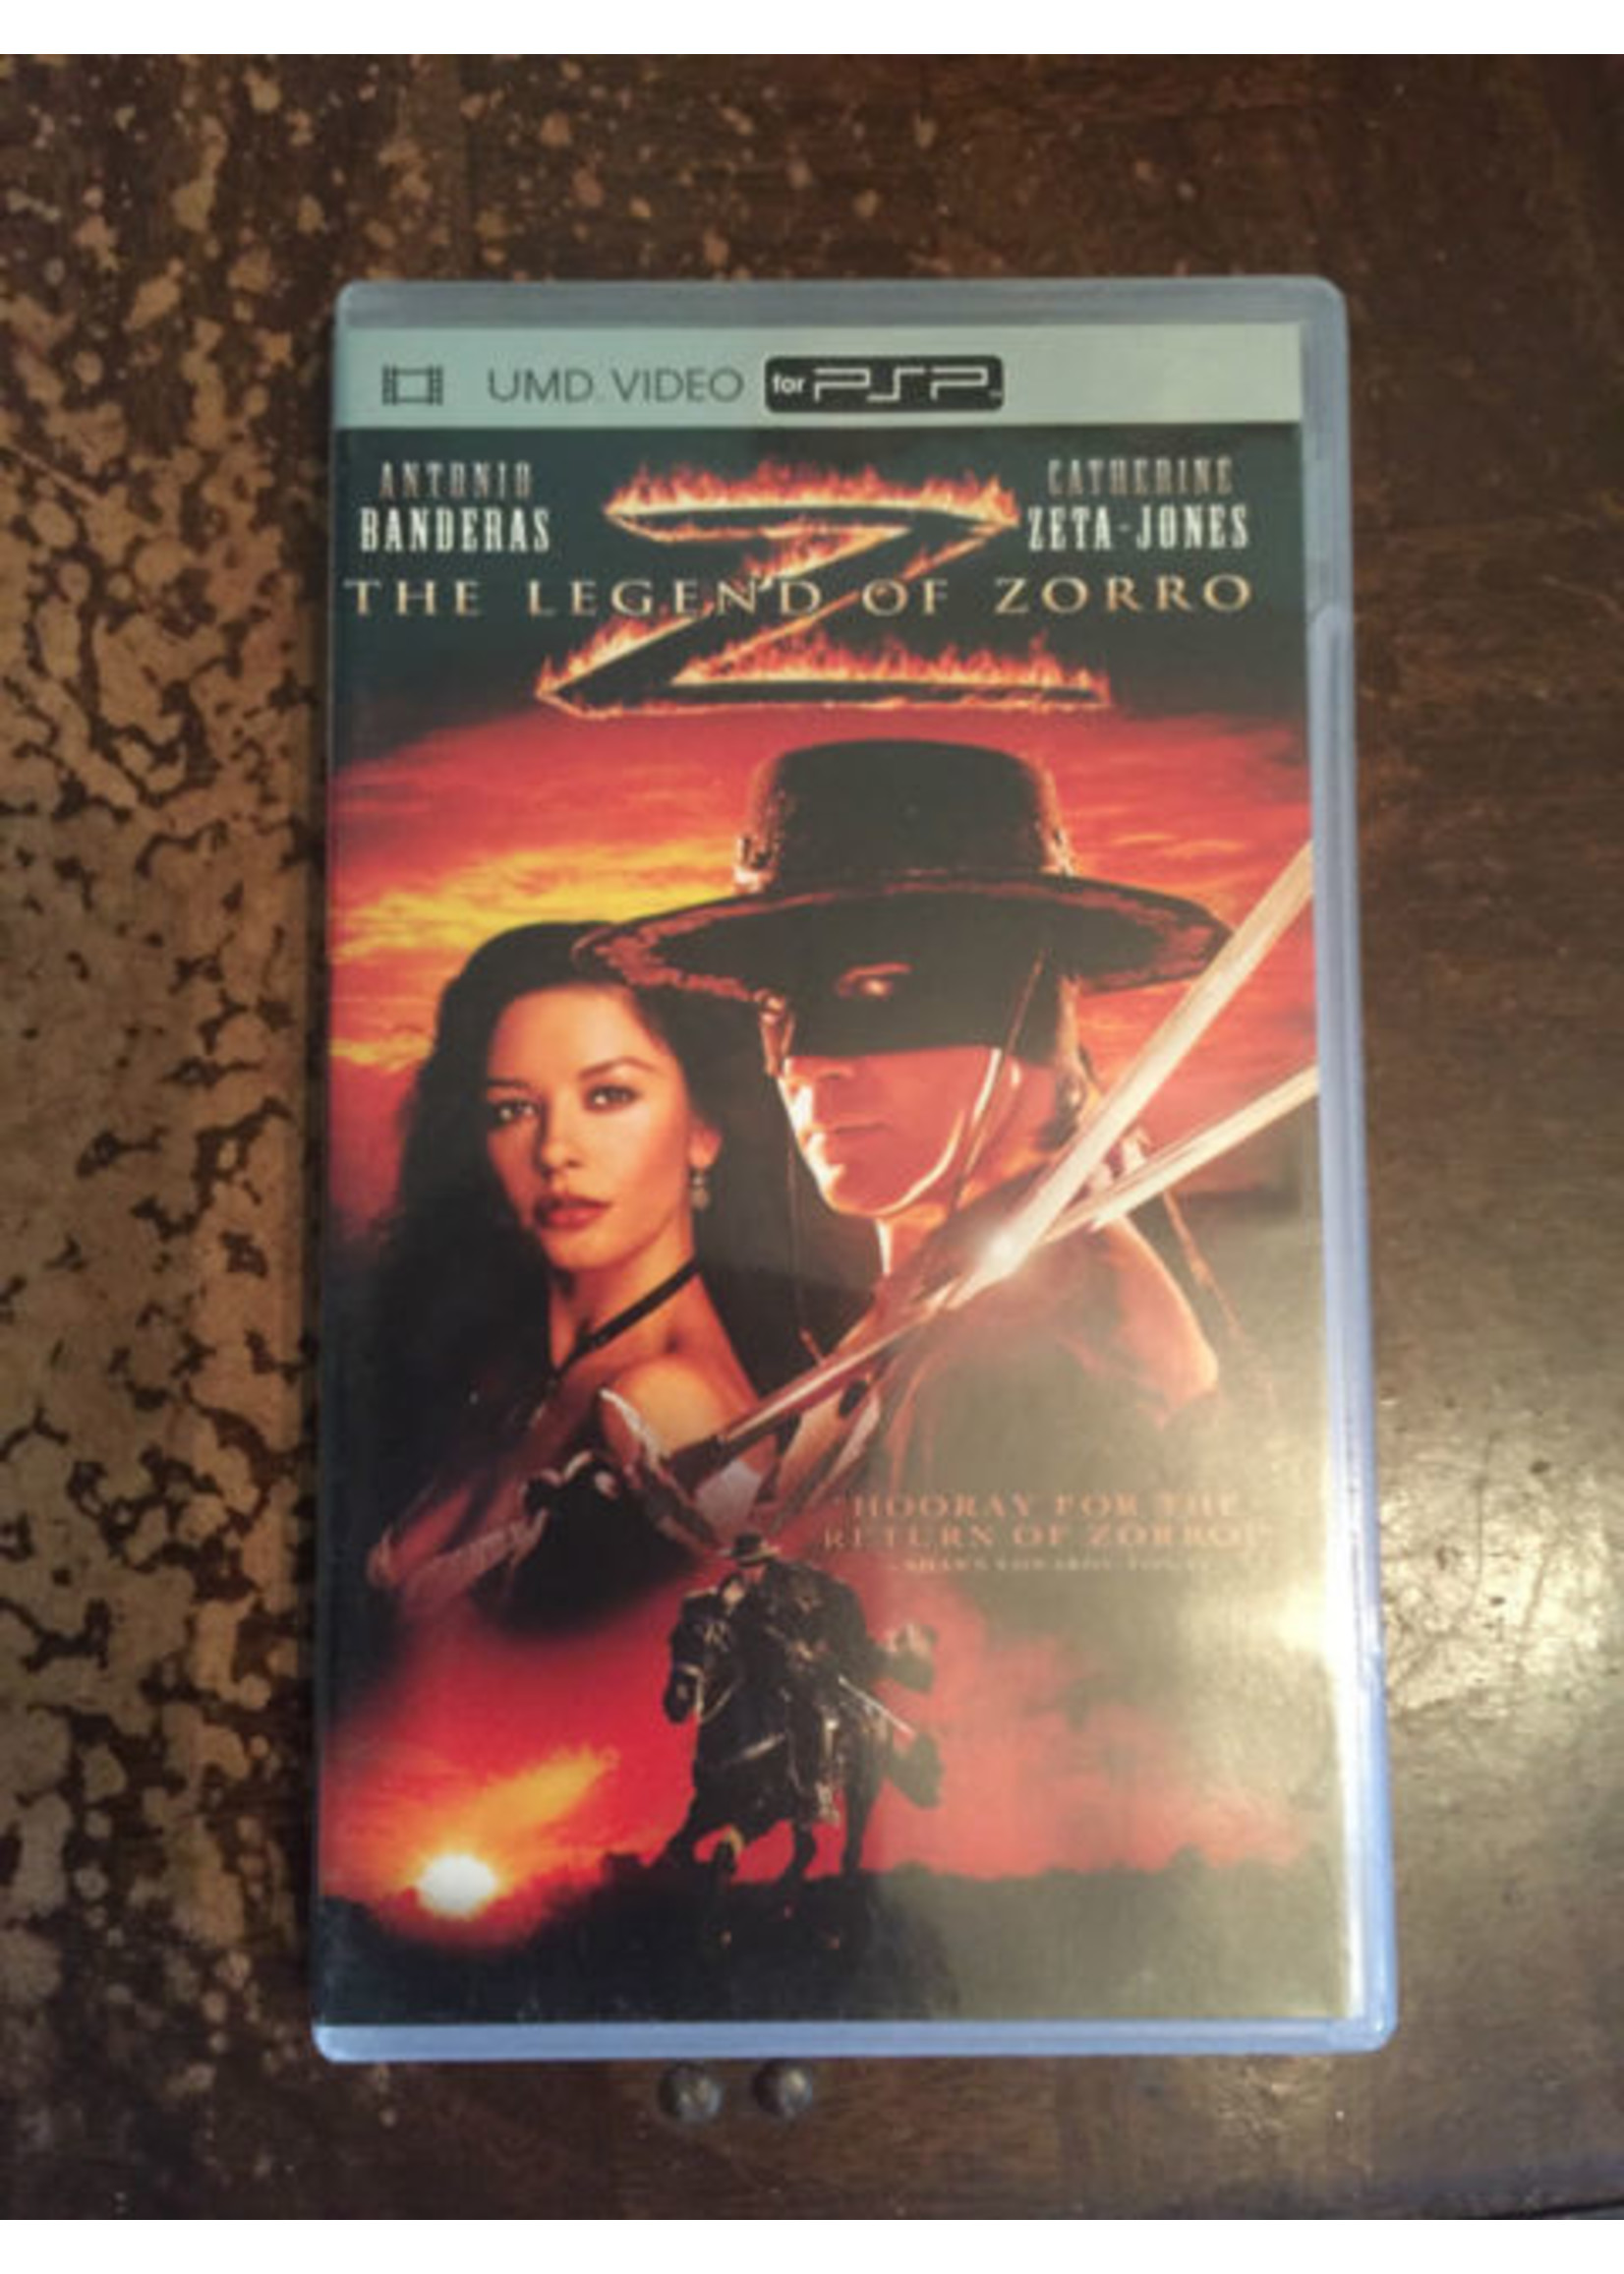 Sony Playstation Portable (PSP) UMD Legend Of Zorro, The - Game Only